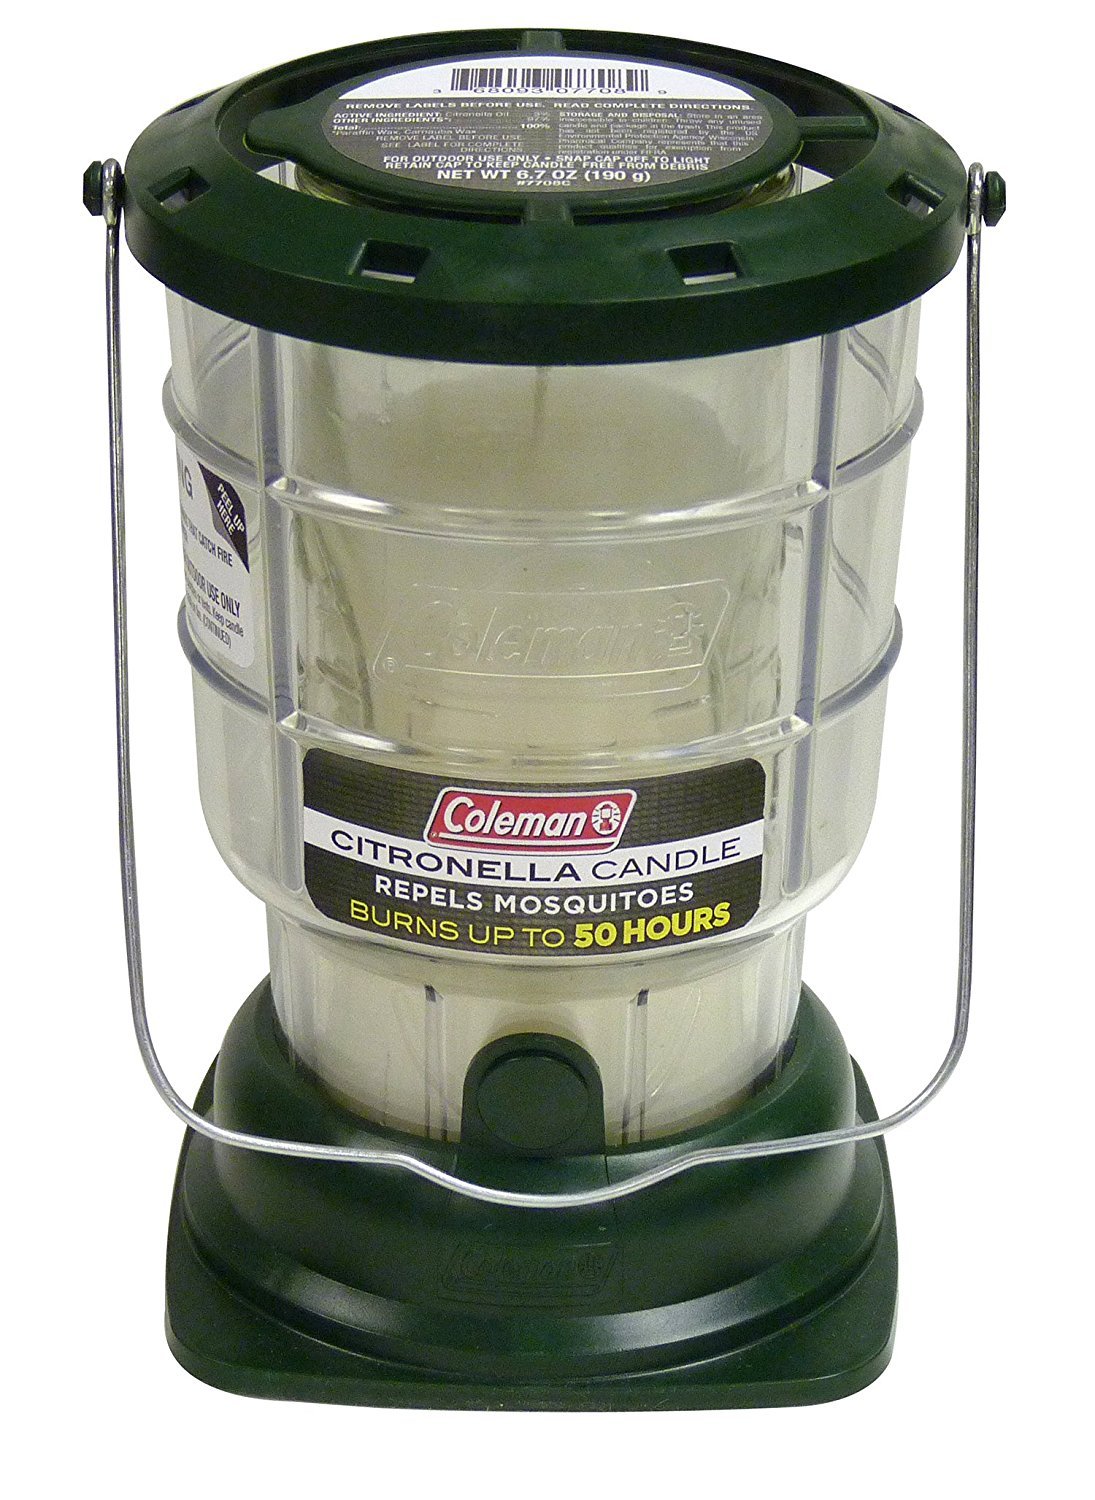 Coleman Citronella Candle Outdoor Lantern - 70+ Hours, 6.7 Ounce, Green - image 3 of 7